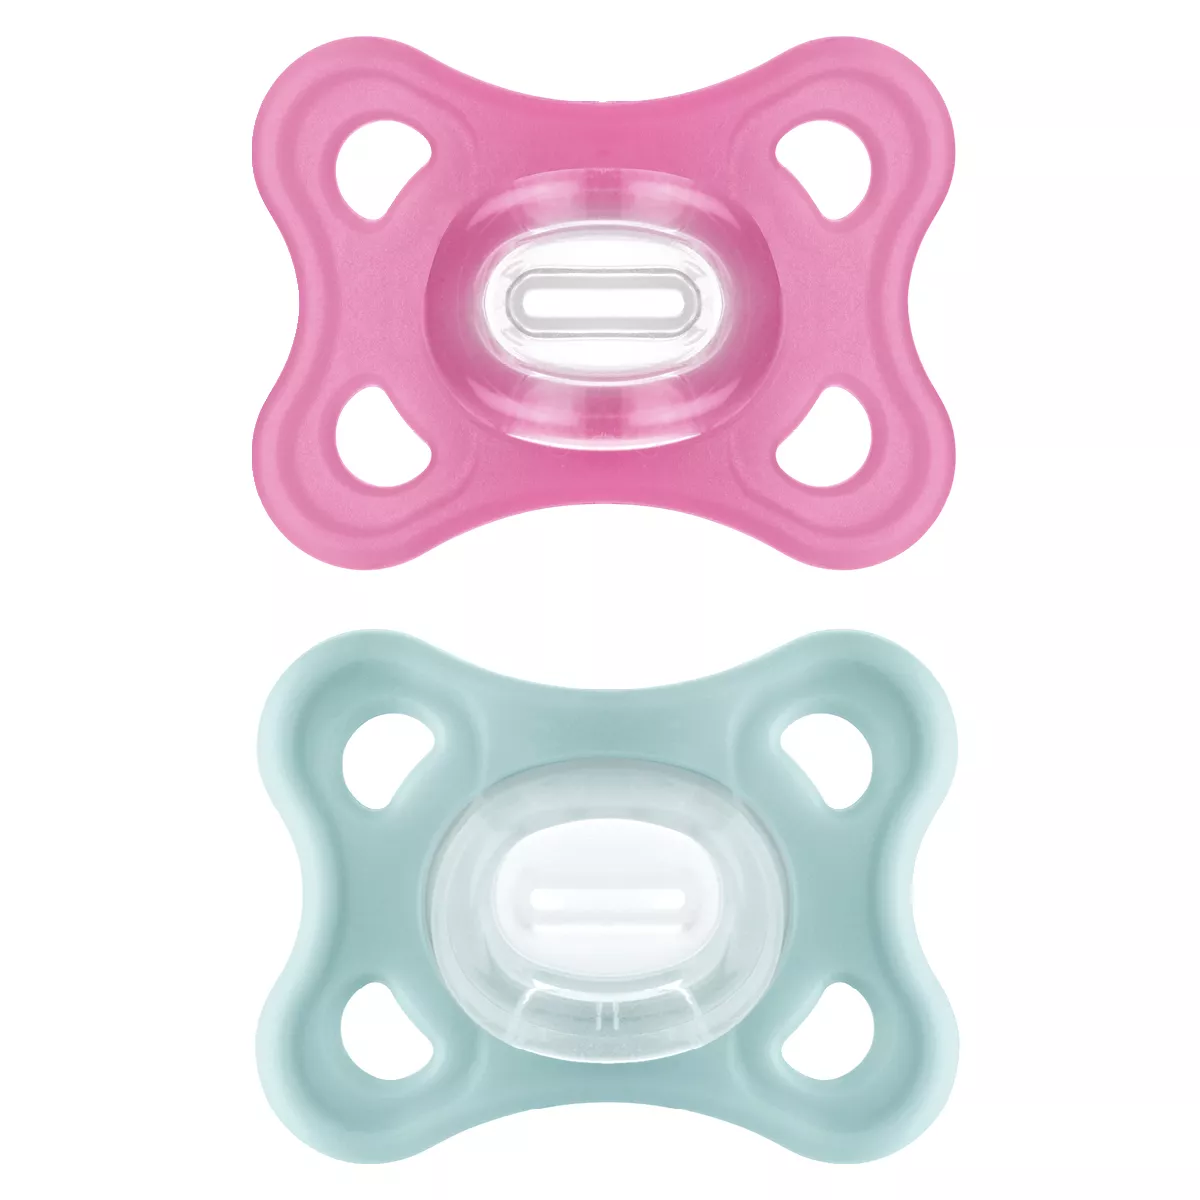 MAM Comfort Silicone Soother  2-6 months, set of 2